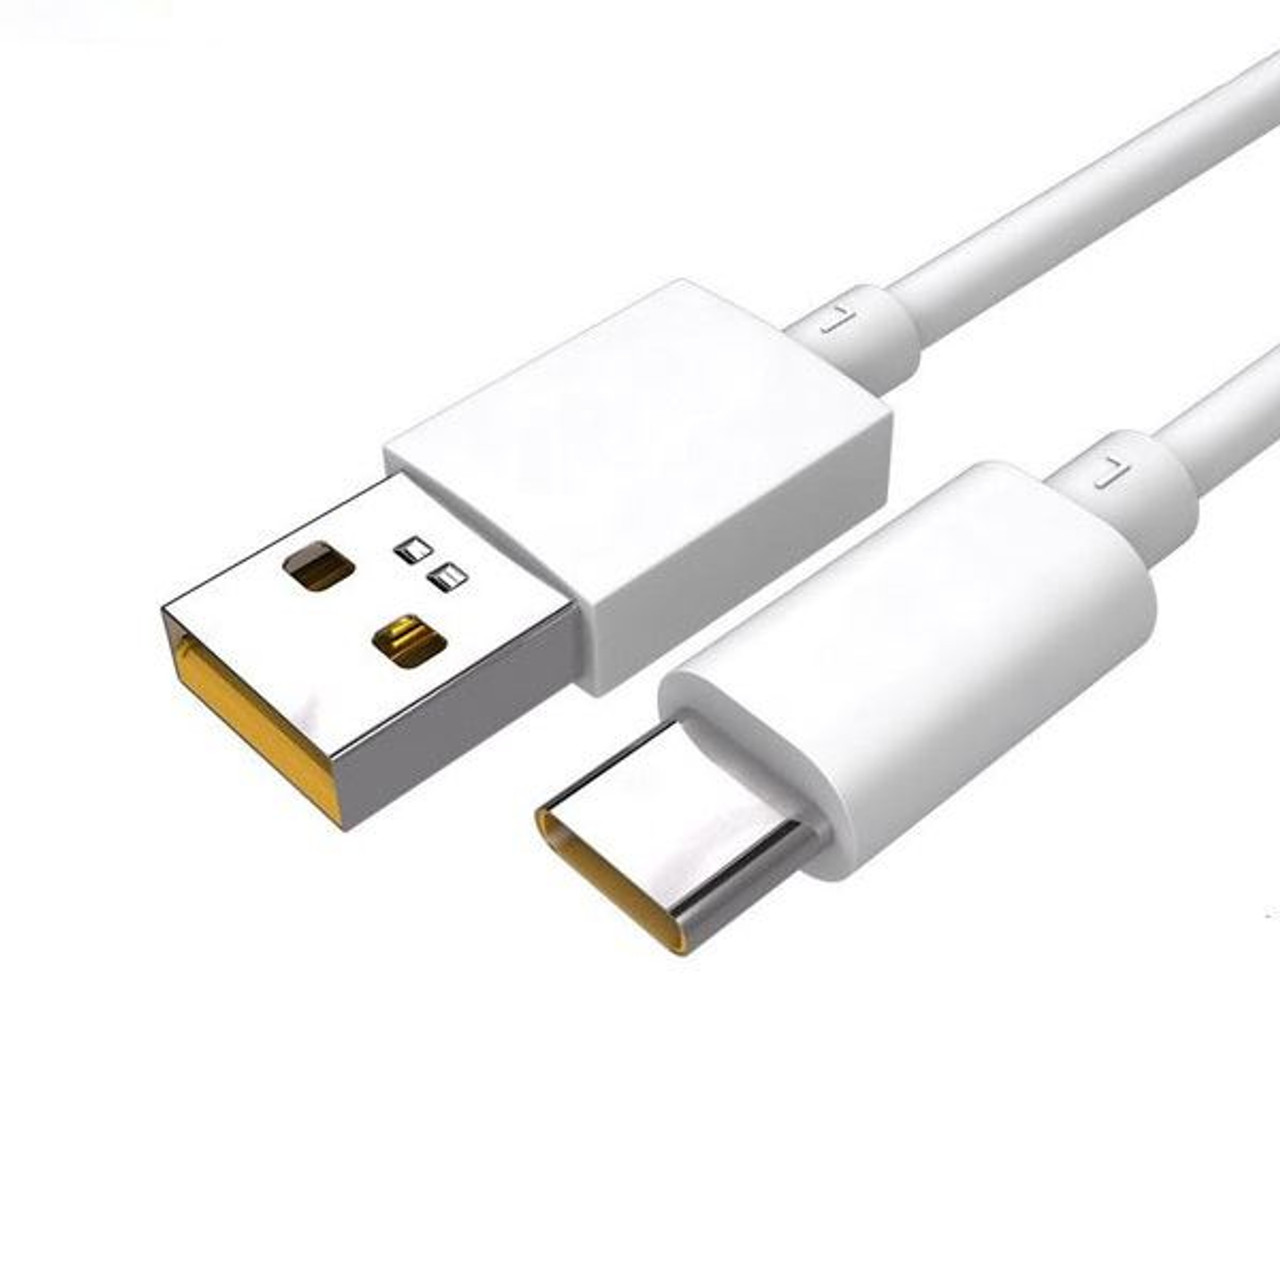 Oppo DL136 USB-C Original charge cable 1m